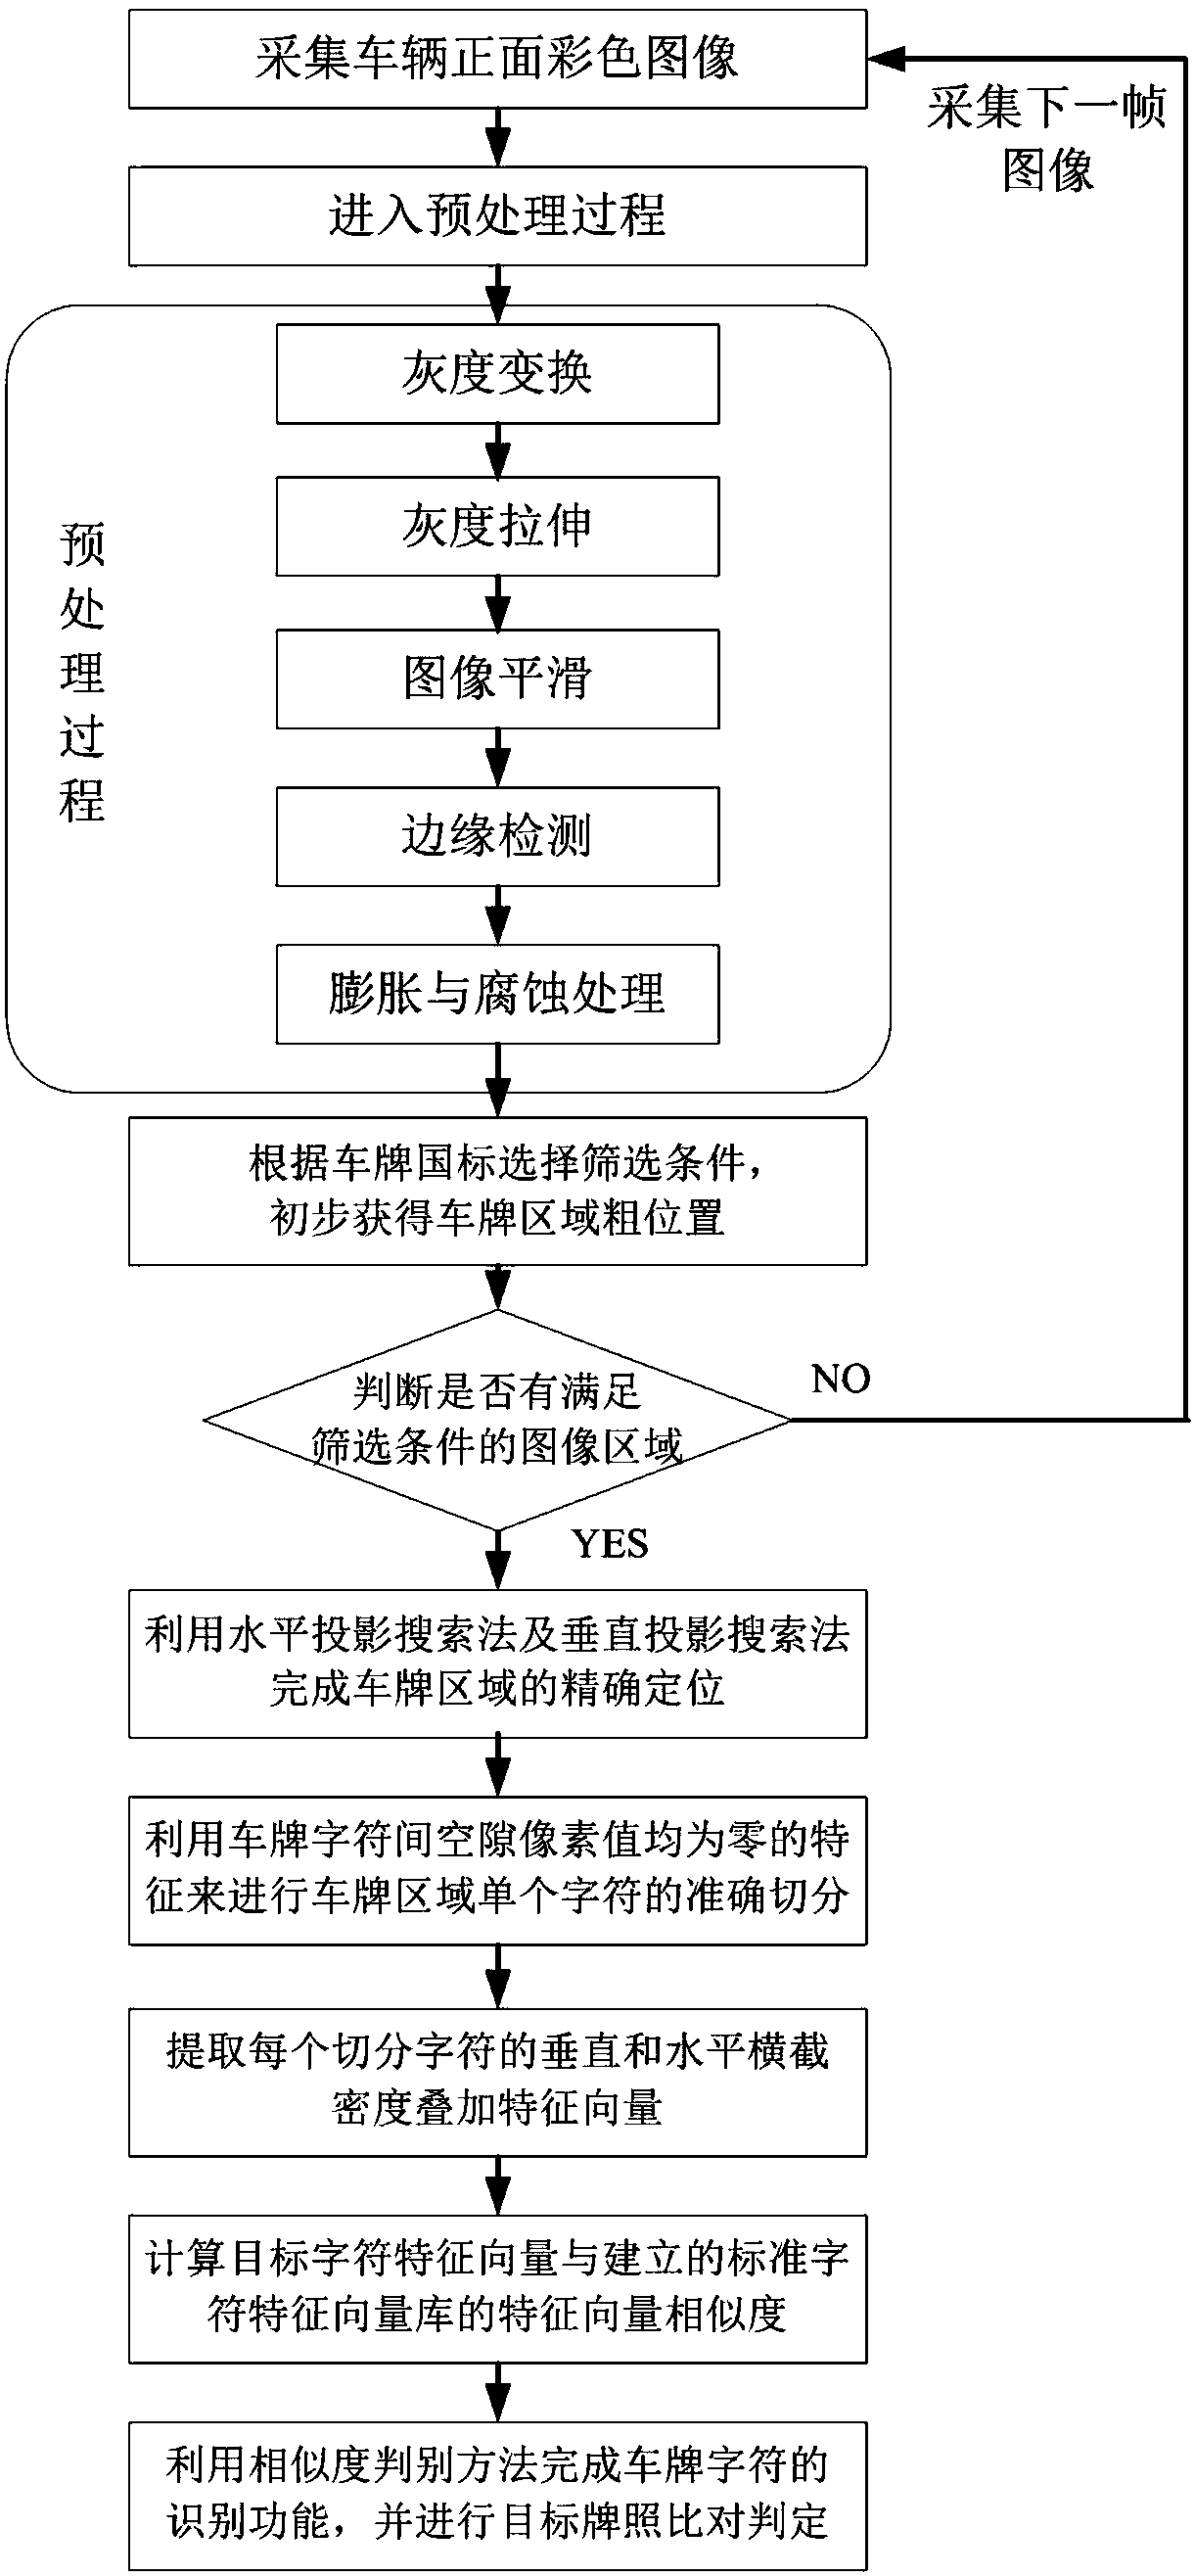 License plate character automatic detection, positioning and recognition method in complex background environment